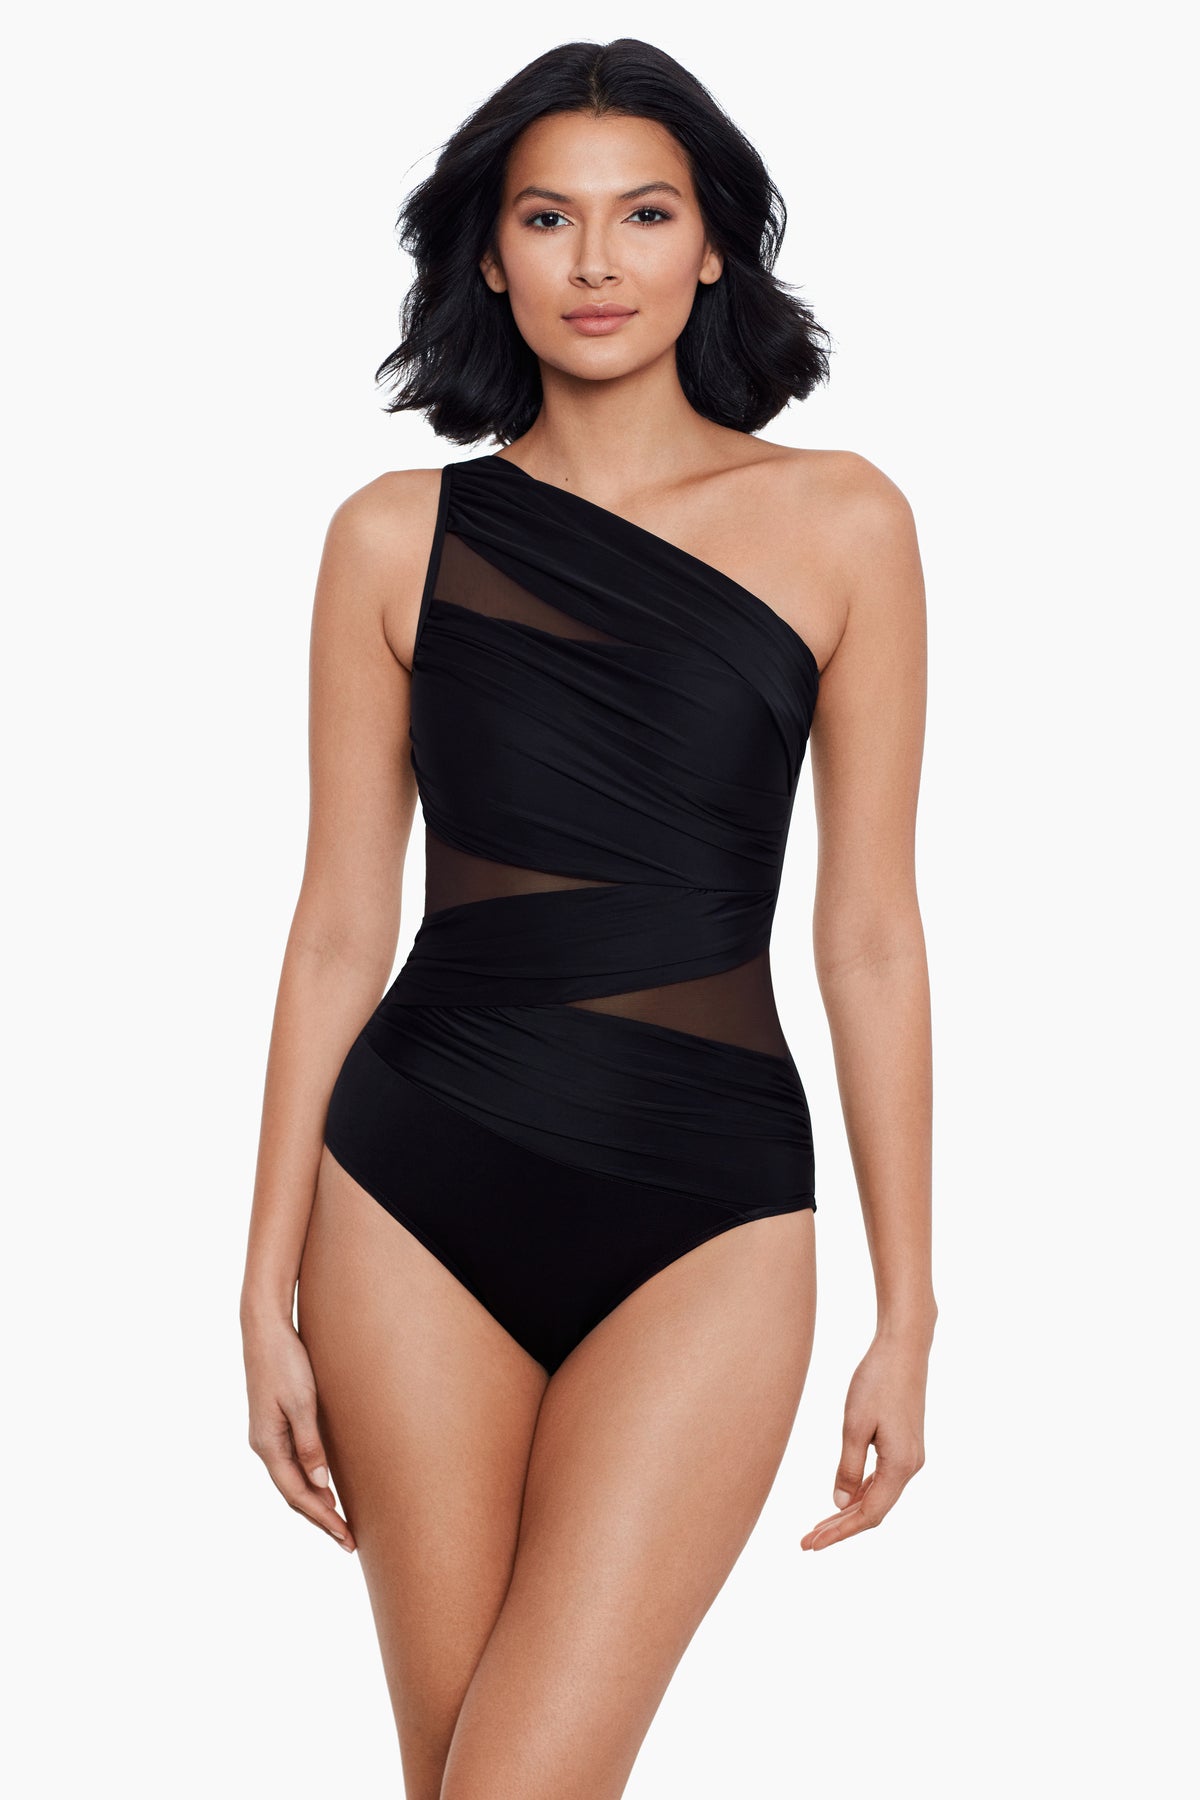 The Best Tummy Control Swimsuit